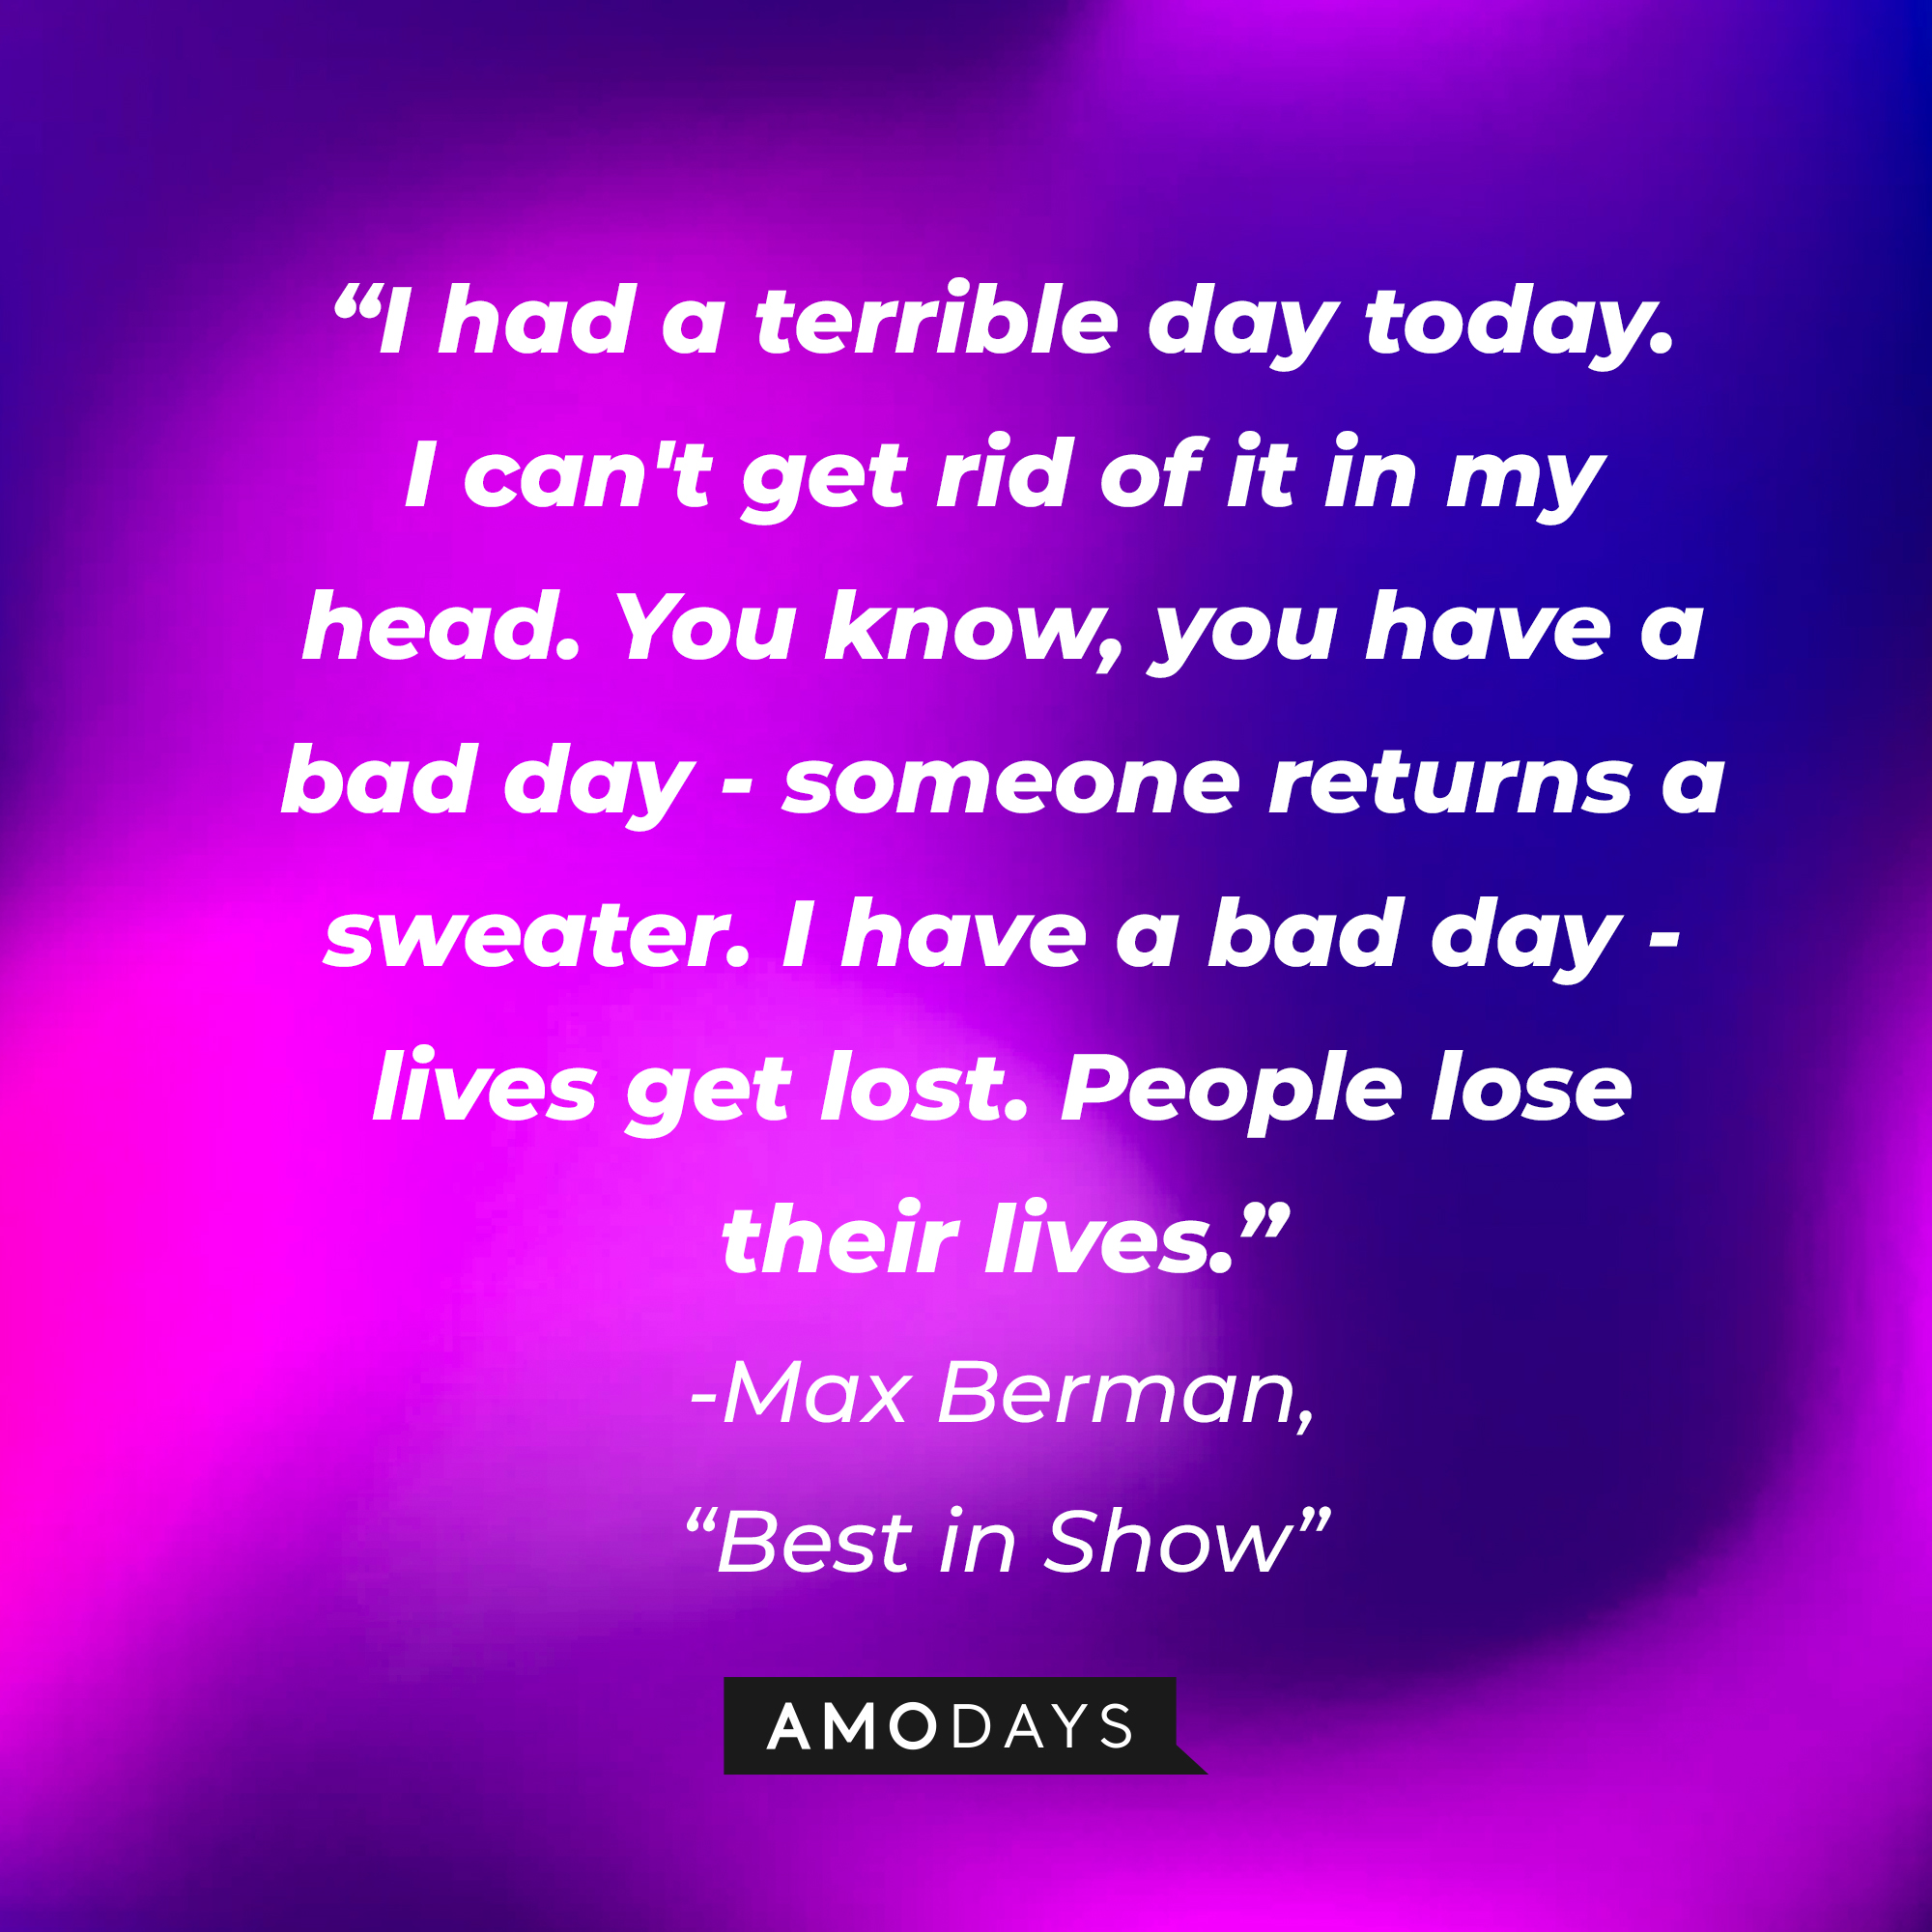 Max Berman's quote in "Best in Show:" "I had a terrible day today. I can't get rid of it in my head. You know, you have a bad day - someone returns a sweater. I have a bad day - lives get lost. People lose their lives." | Source: AmoDays